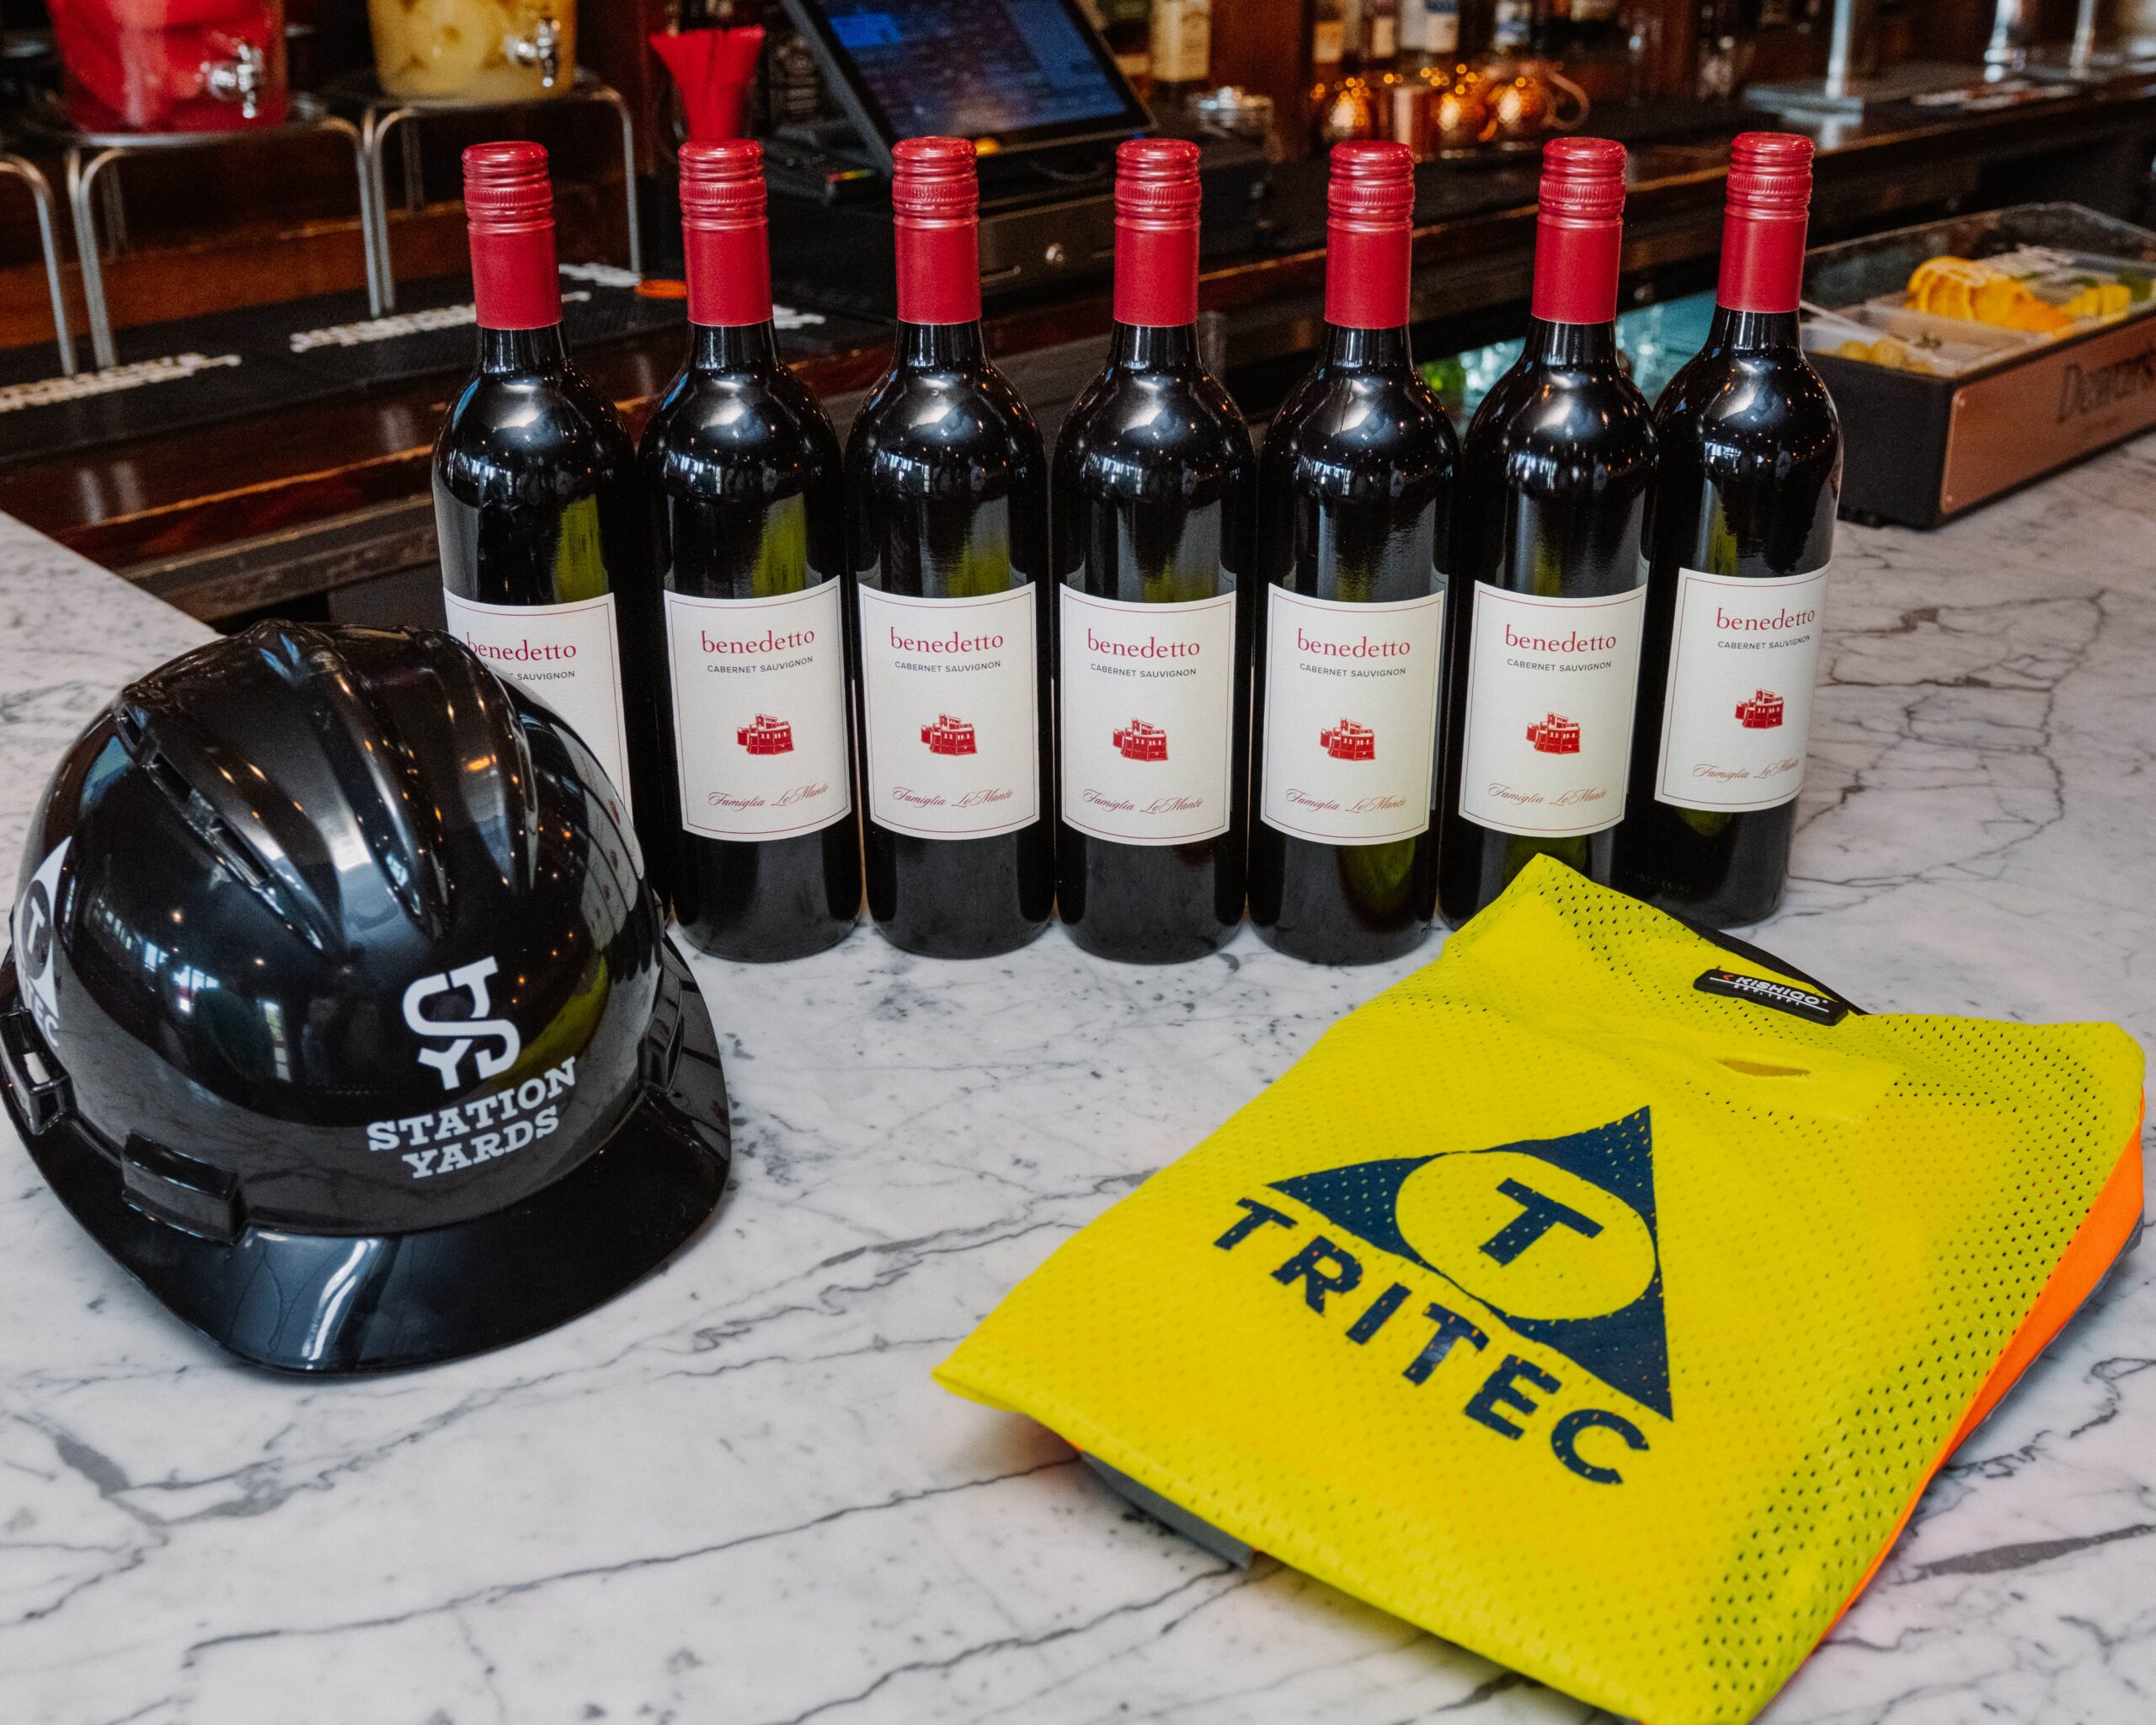 VESPA Italian Kitchen & Bar house wine with Station Yards hardhat and TRITEC safety vest